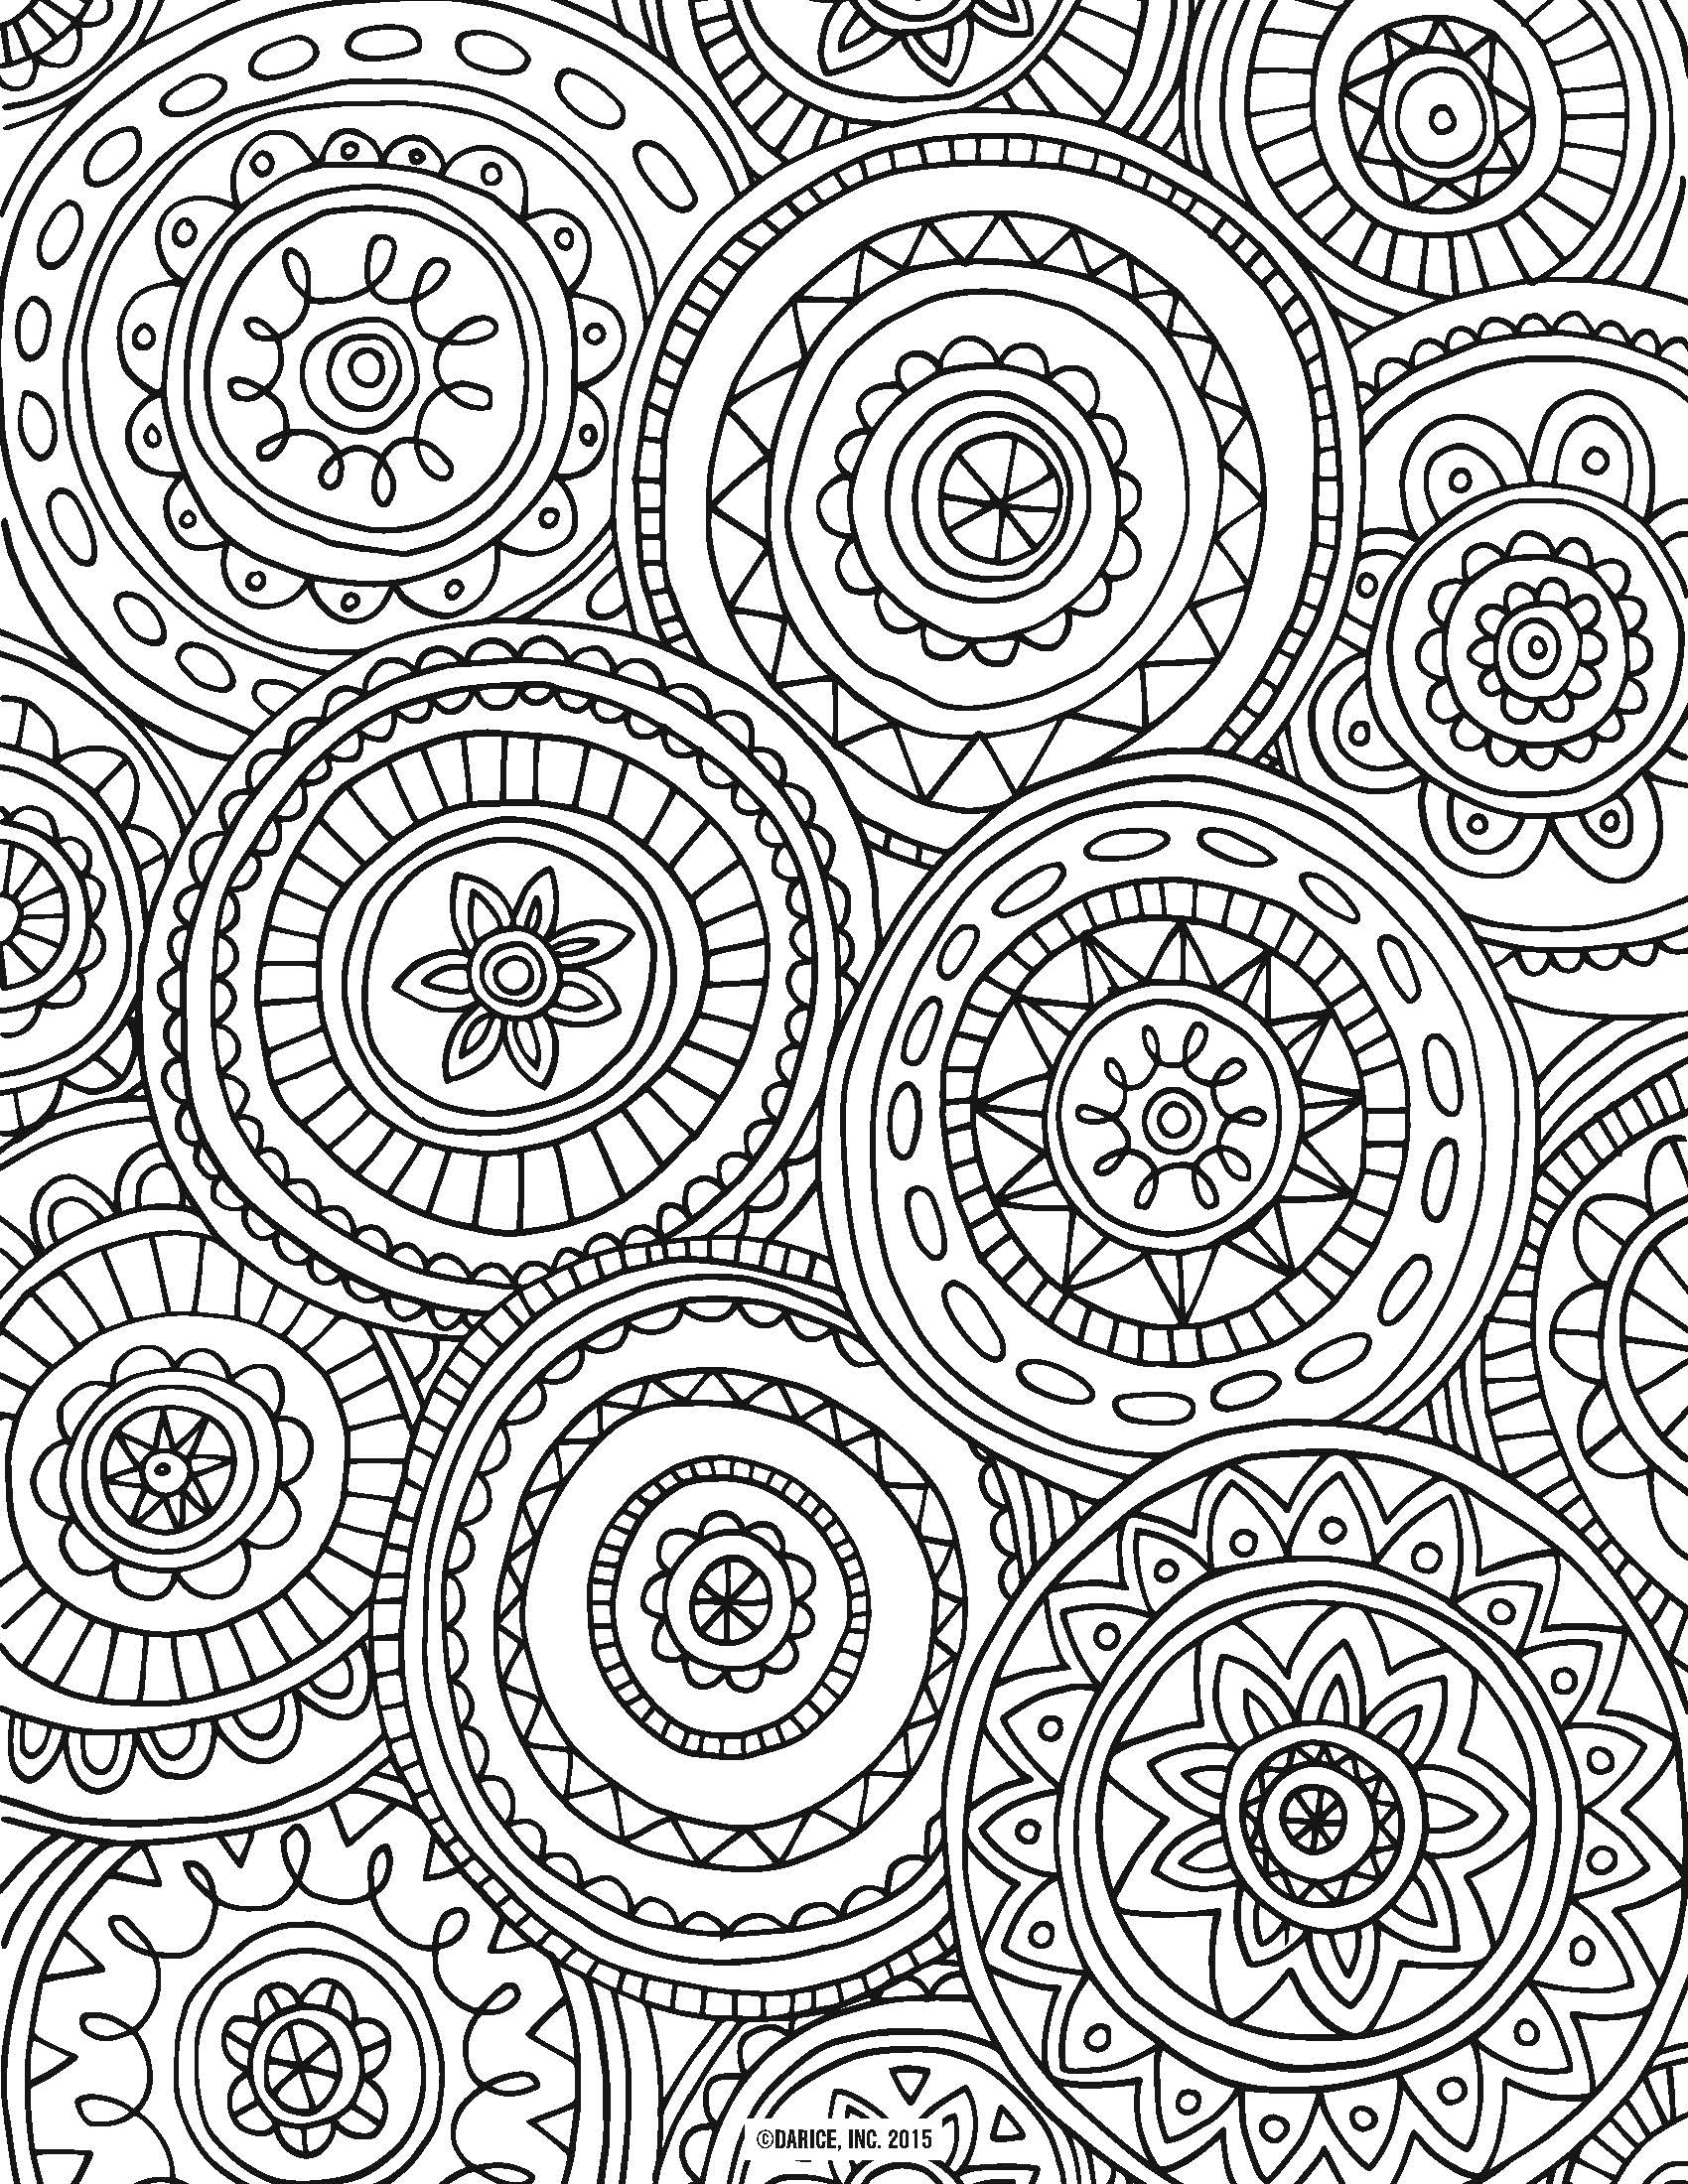 Adult Coloring Pages Coloring Large Coloring Pages For Adults Printable Coloring Pages